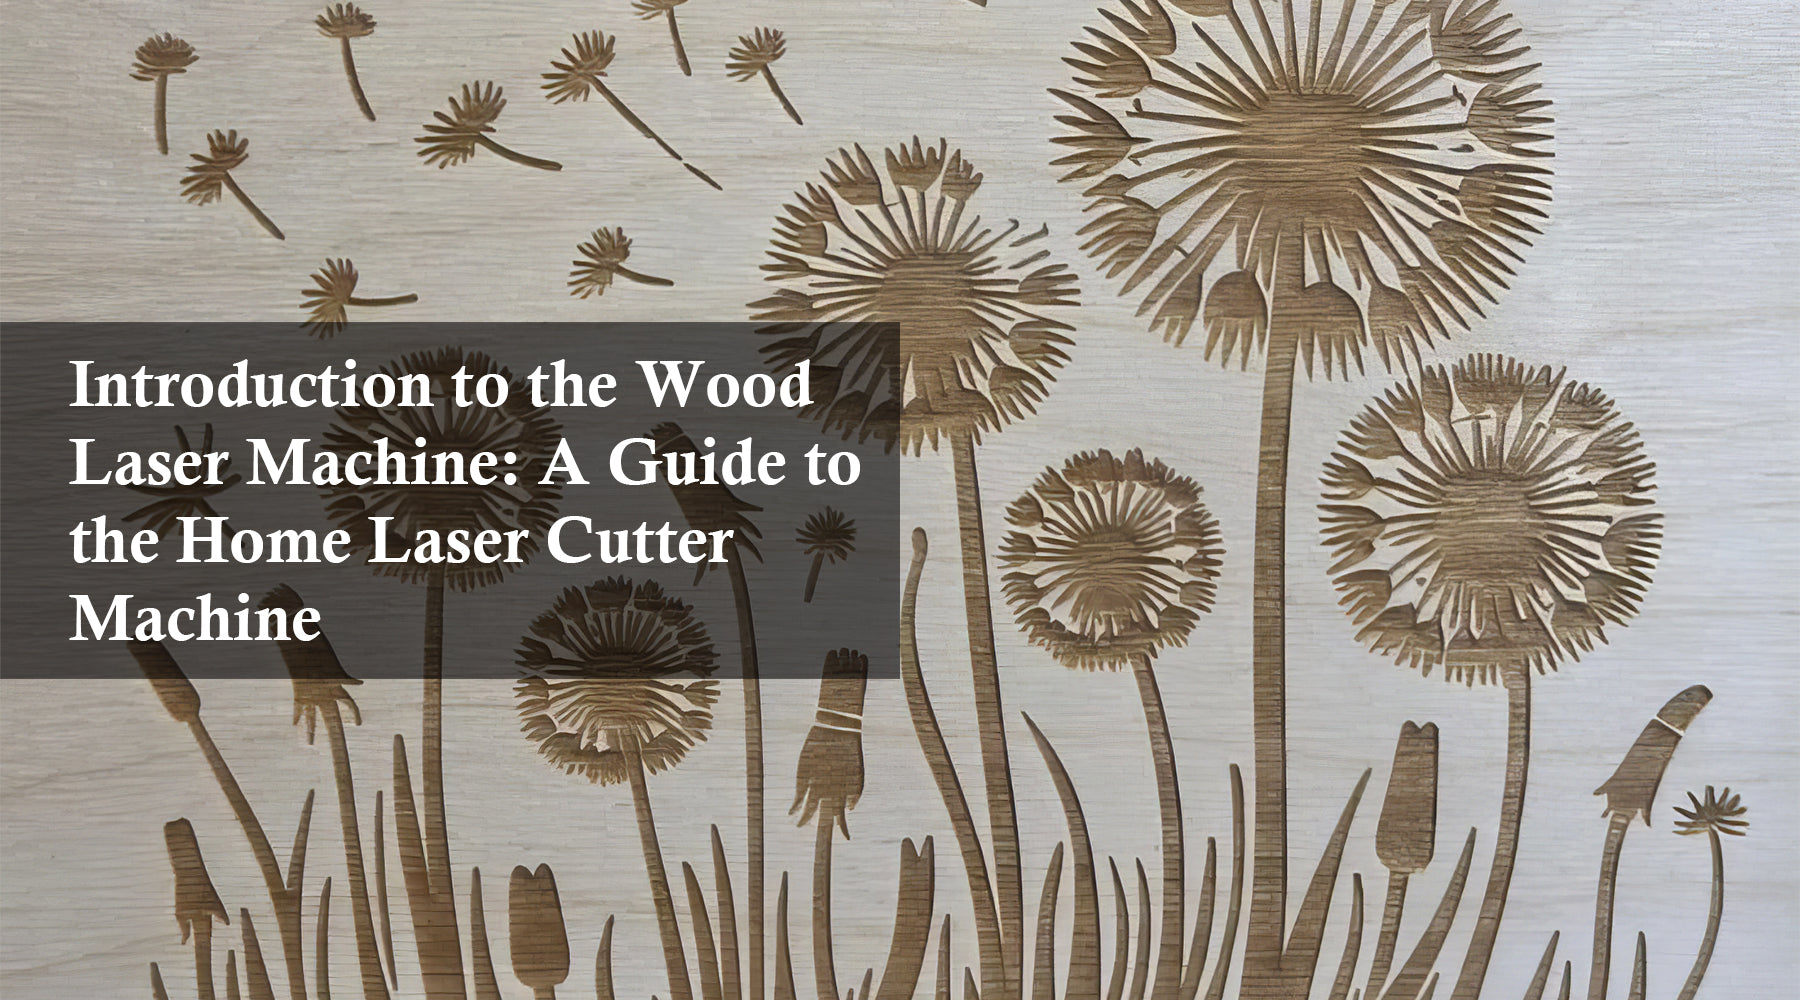 Introduction to the Wood Laser Machine: A Guide to the Home Laser Cutter Machine